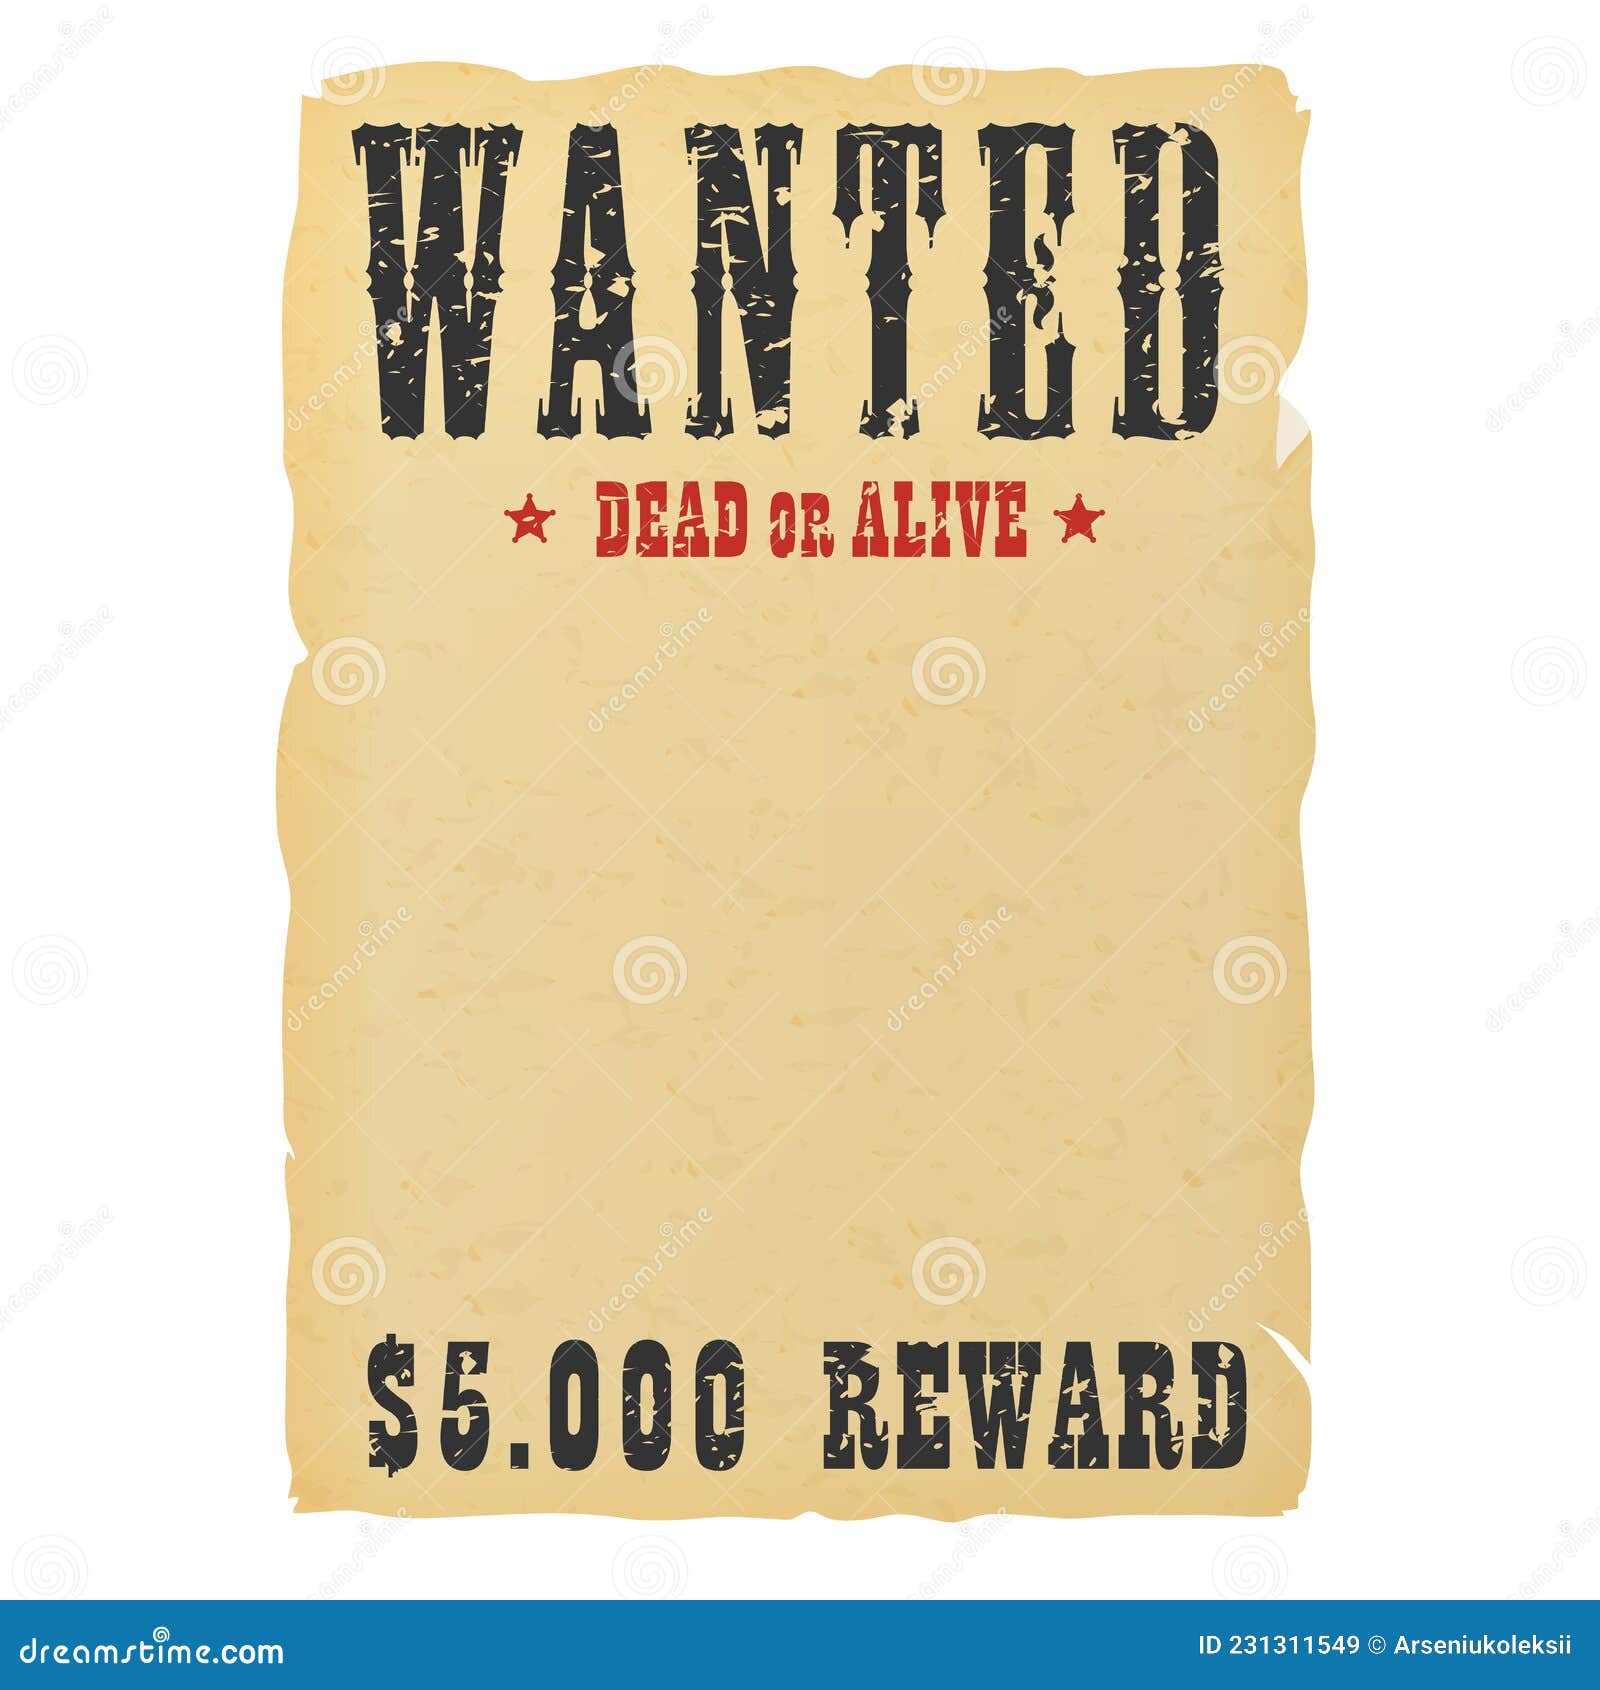 wanted reward poster template